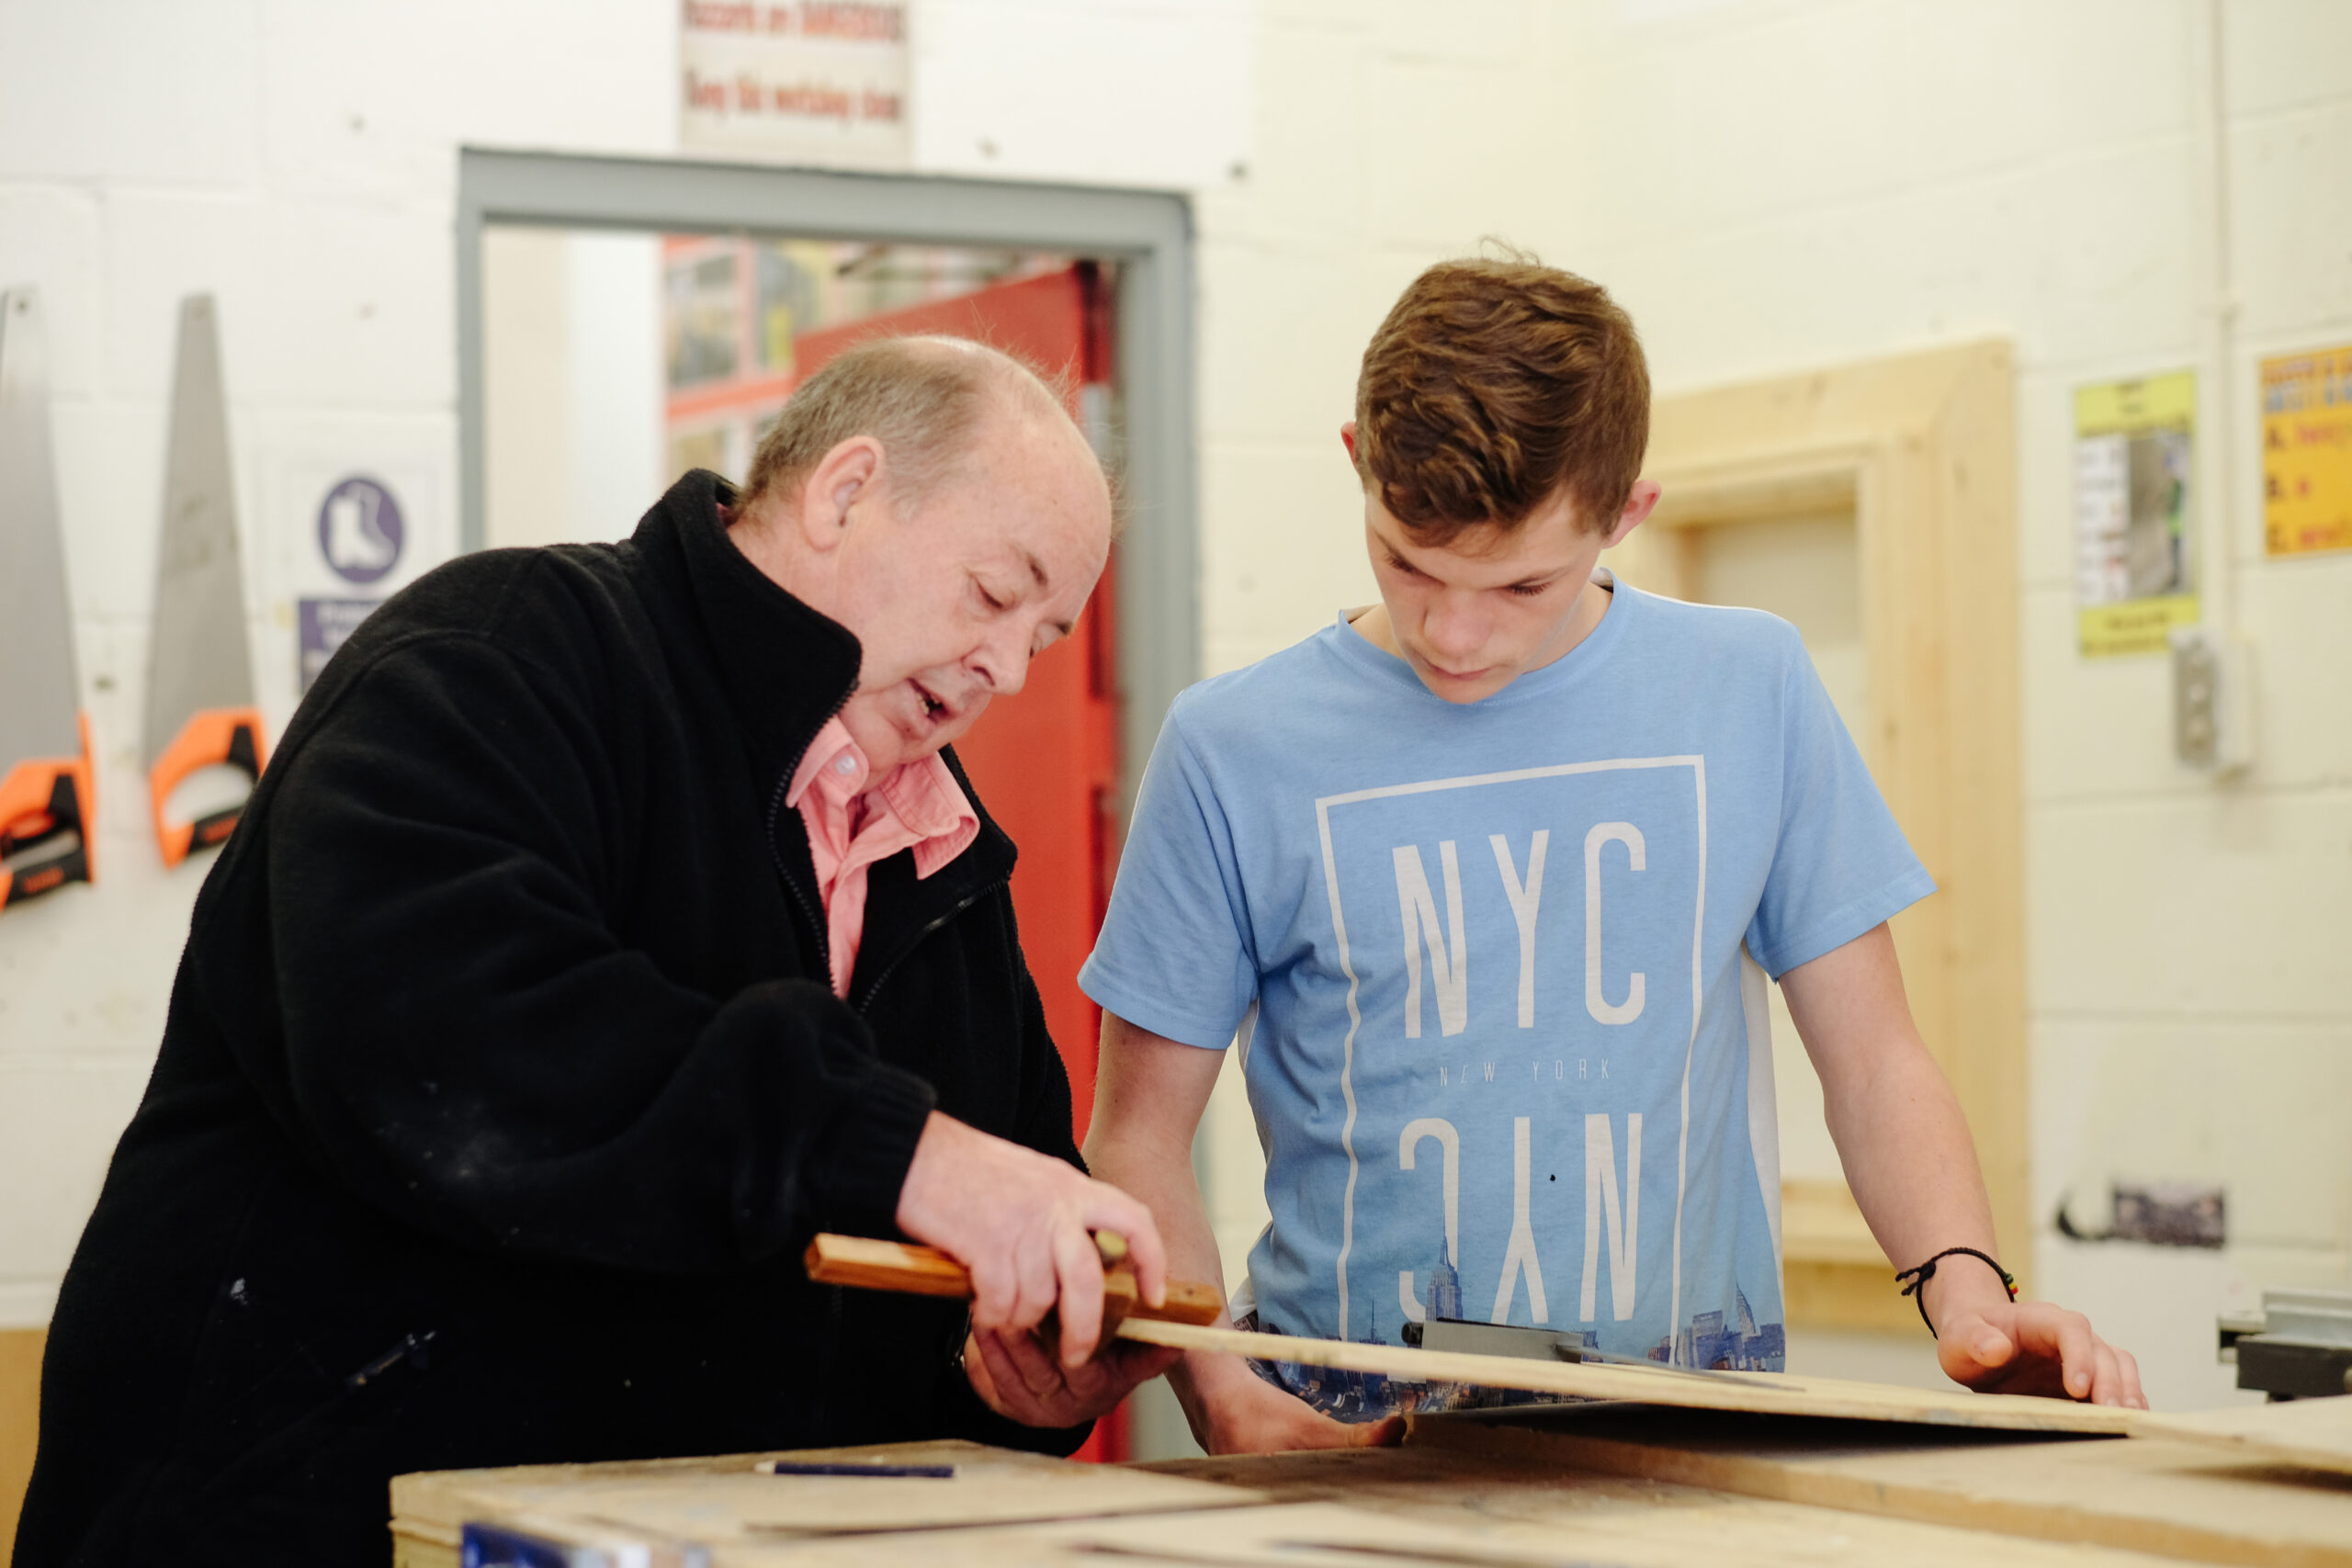 Woodwork learner with tutor in a workshop